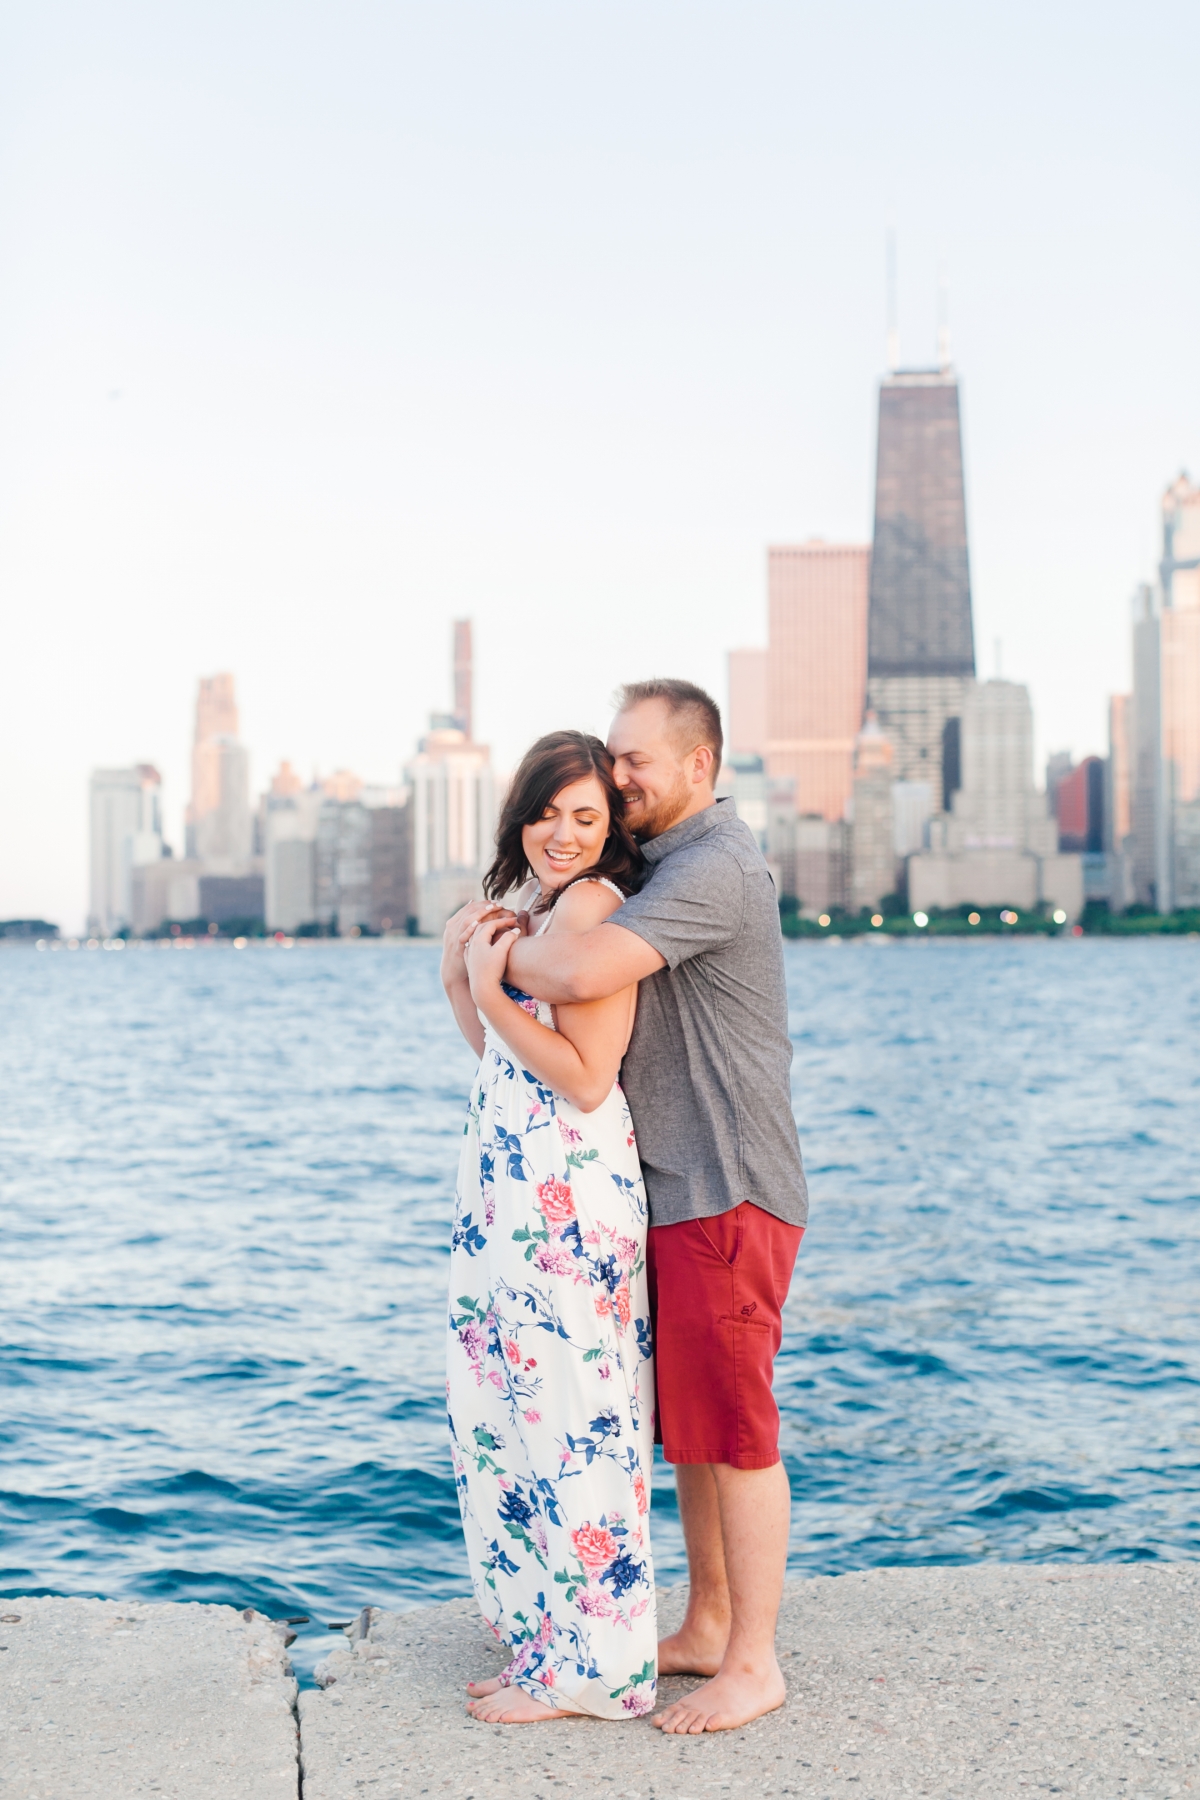 Classic Summer Engagement Session at North Ave Beach